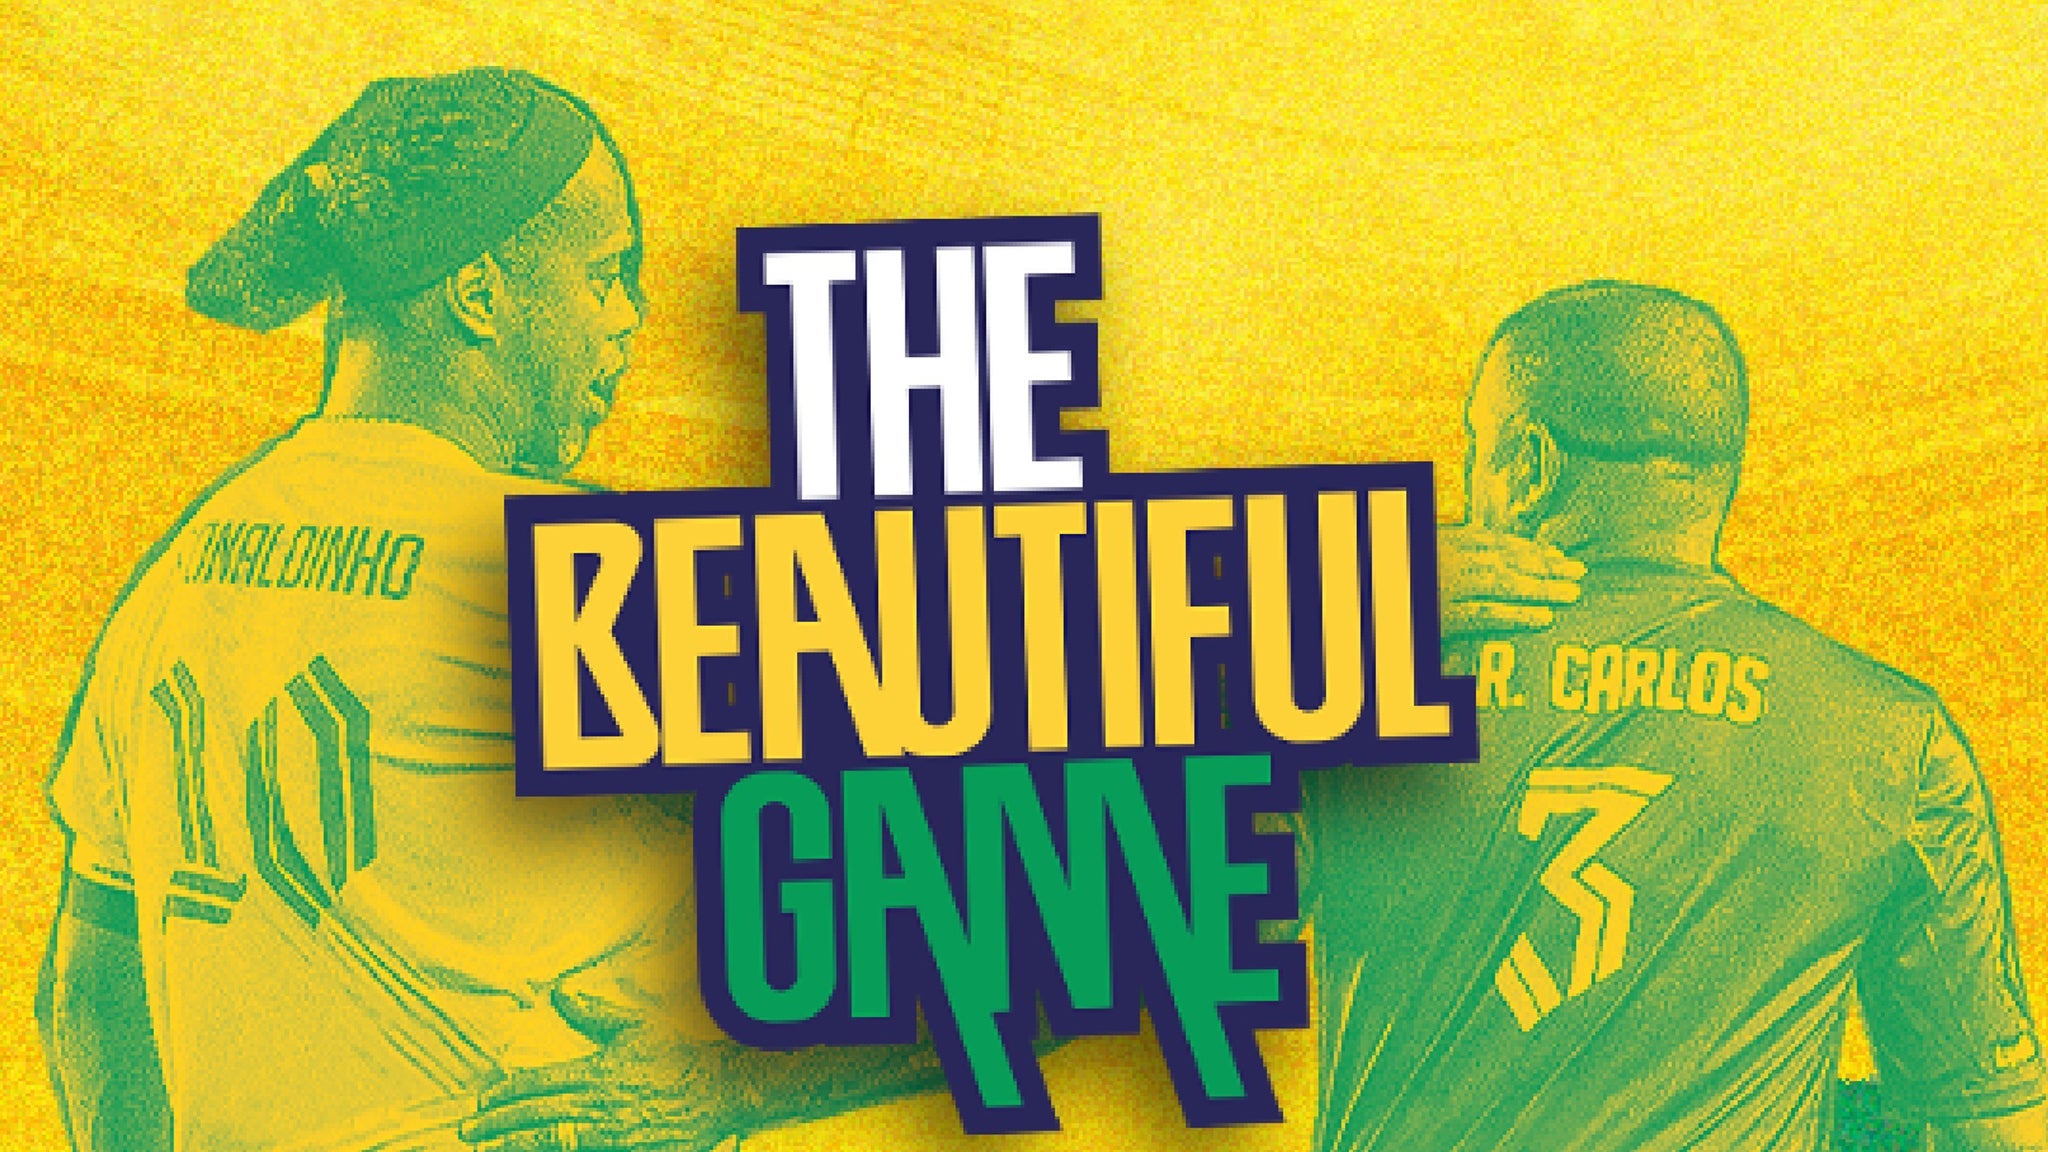 The Beautiful Game Tickets Single Game Tickets & Schedule